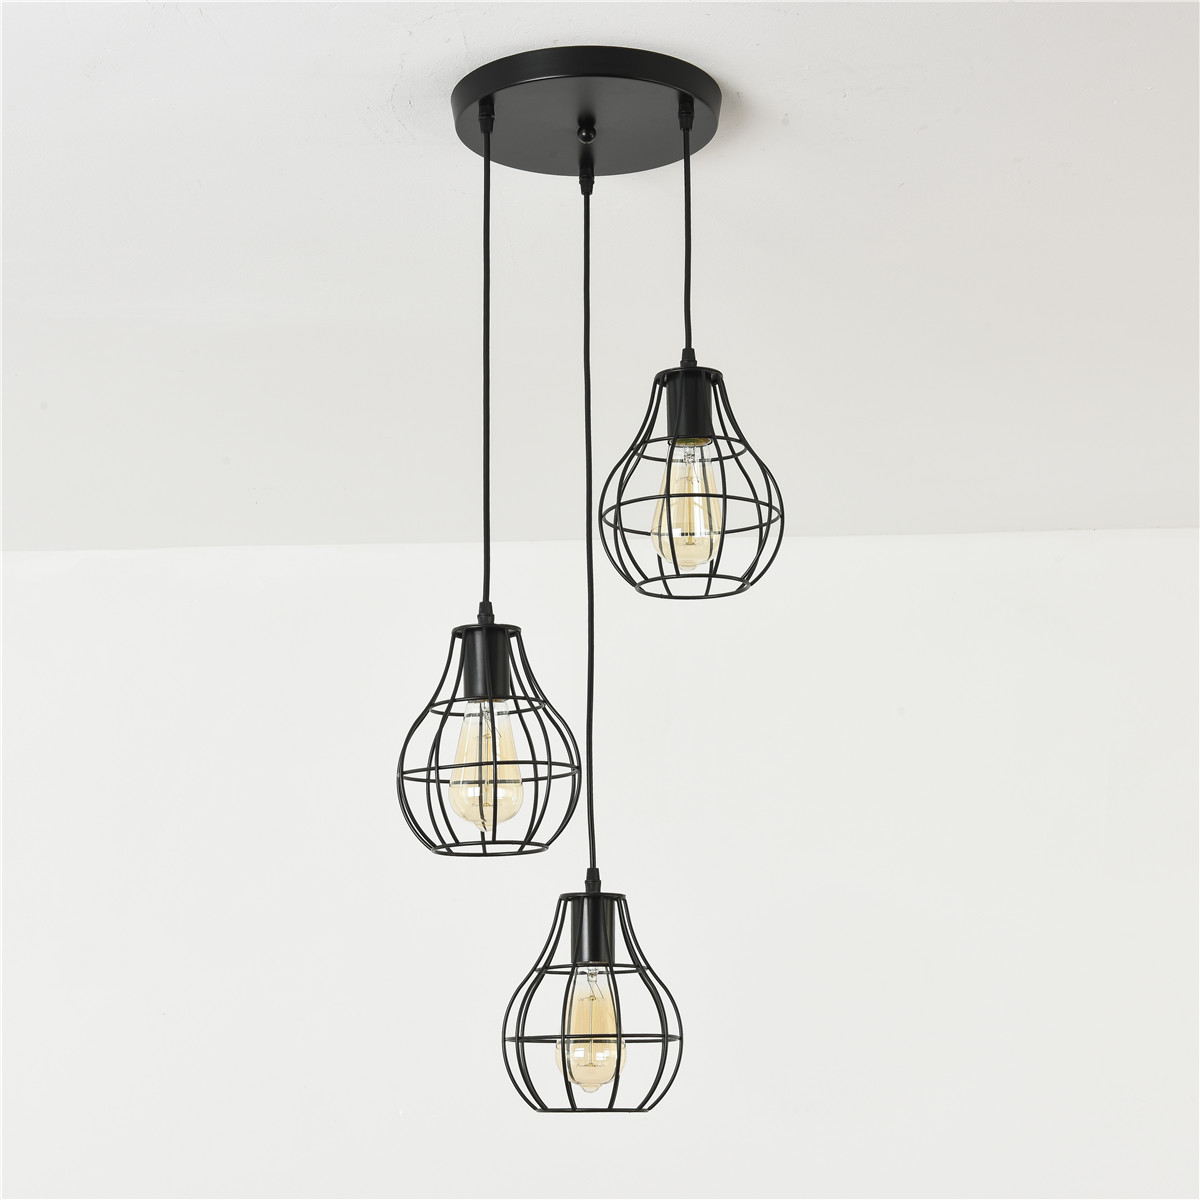 3-Lights-Industrial-Pendant-Lighting-Ceiling-Metal-Vintage-Hanging-Retro-Lamp-Without-Bulb-1710143-5